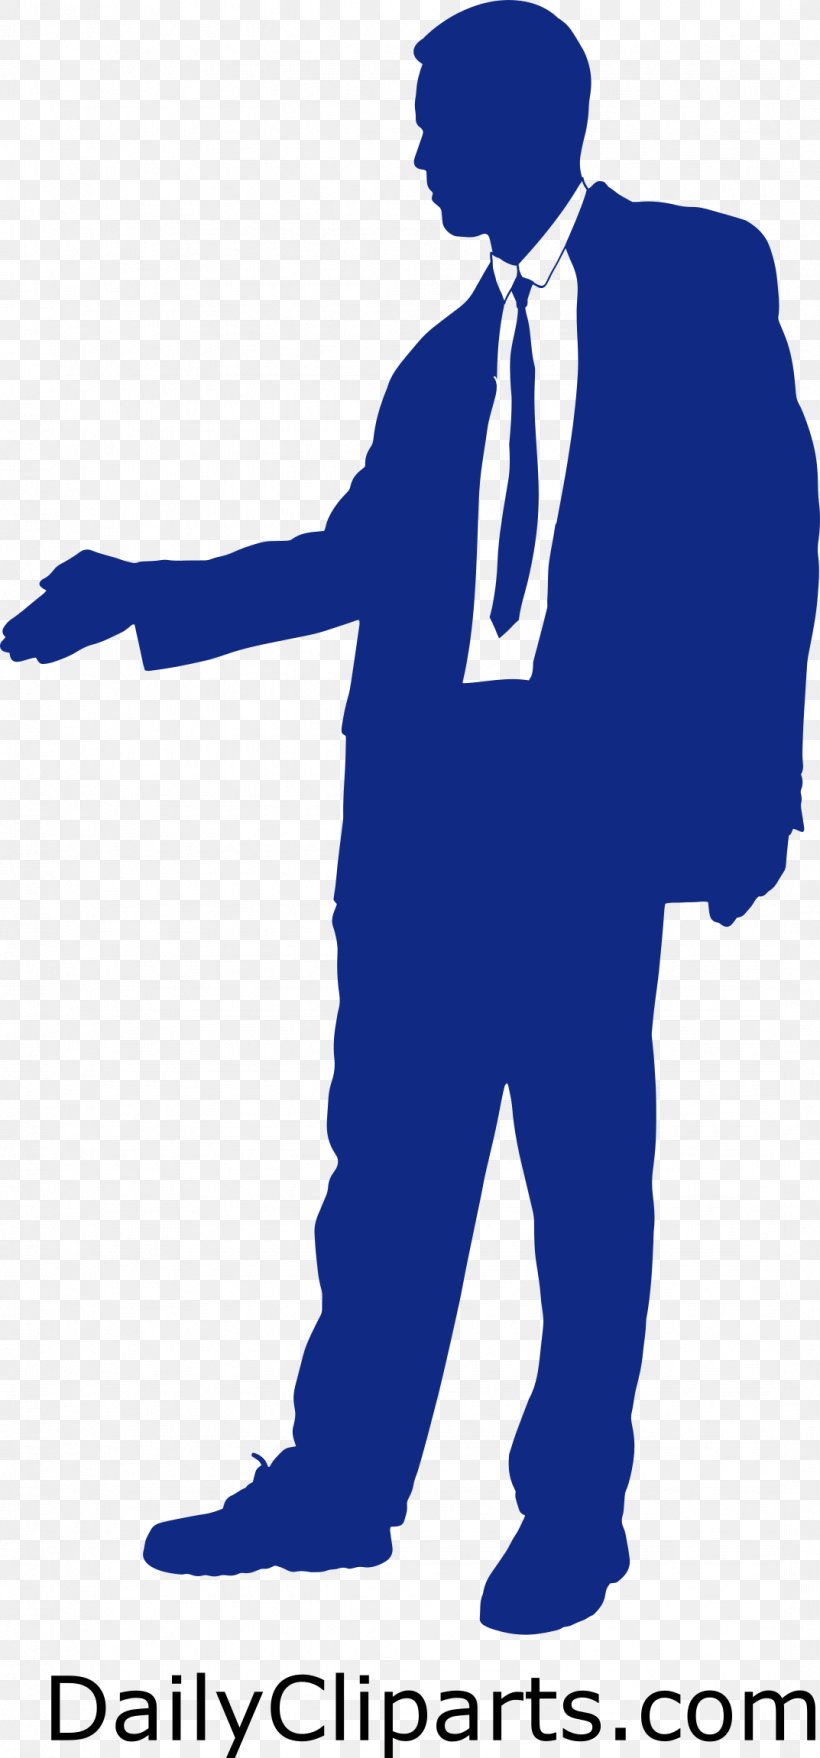 Person Cartoon, PNG, 1073x2301px, Silhouette, Businessperson, Electric Blue, Formal Wear, Gentleman Download Free